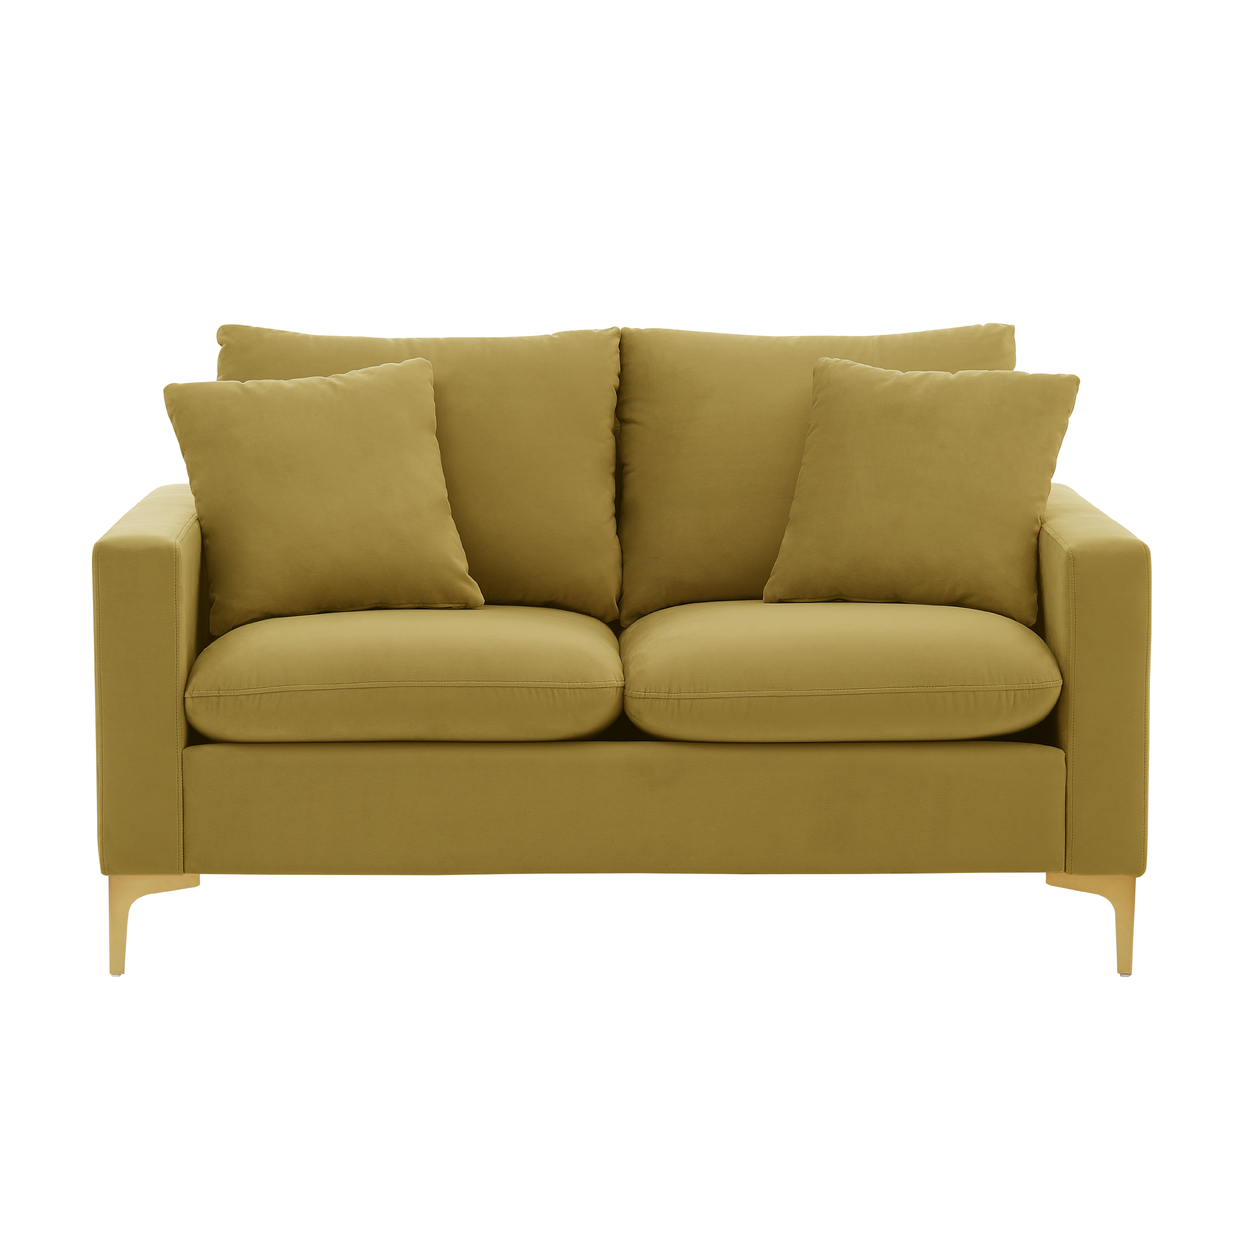 Iconic Home Roxi Loveseat Velvet Upholstered Multi-Cushion Seat Gold Tone Metal Y-Legs With 2 Decorative Pillows - Gold